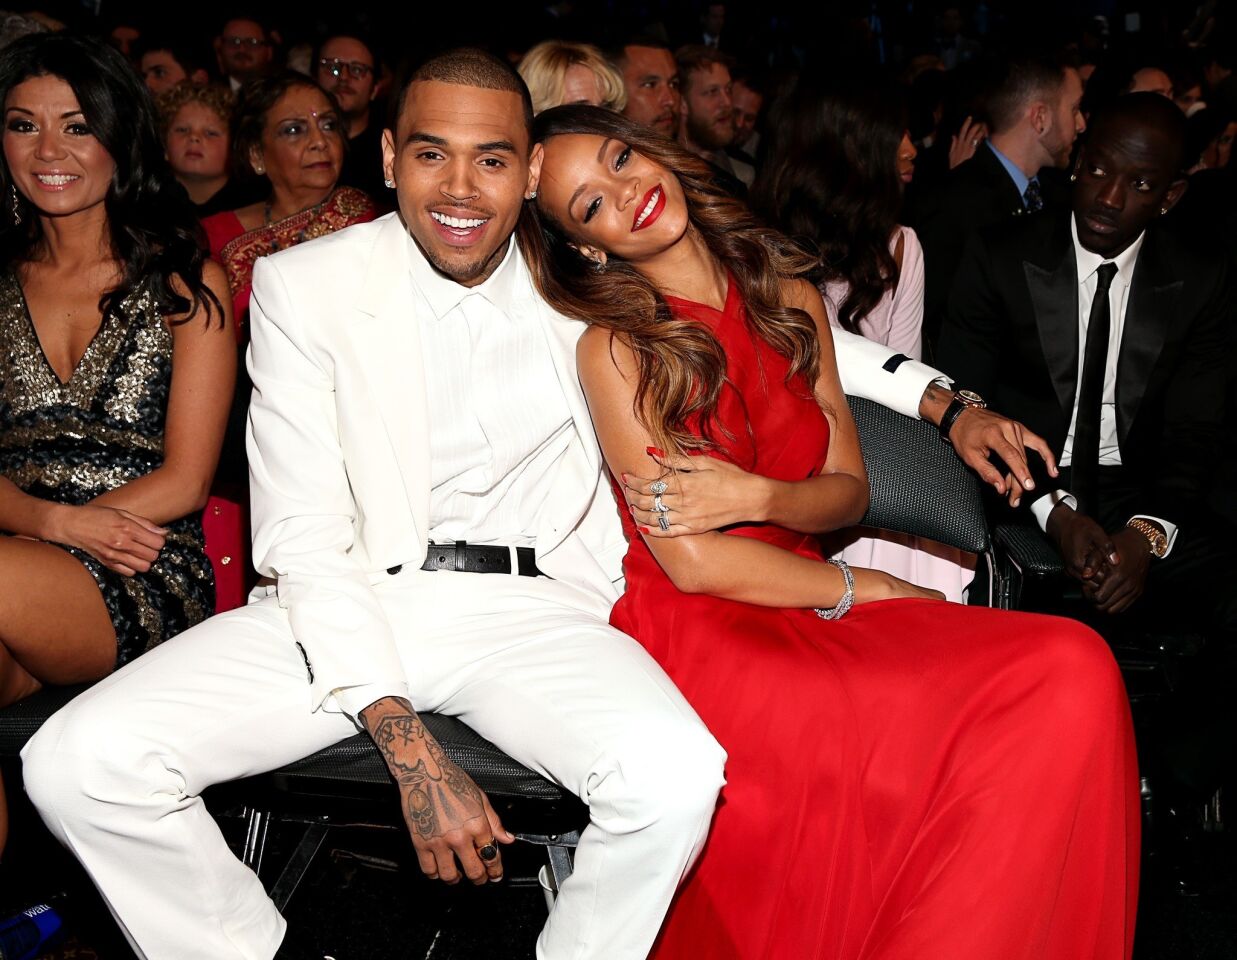 The tumultuous couple officially got back together after months of openly flirting on Twitter, collaborating on the sex-themed song "Birthday Cake" and nonchalant "Nobody's Business" and Rihanna professing her love to Chris Brown on "Oprah's Next Chapter."